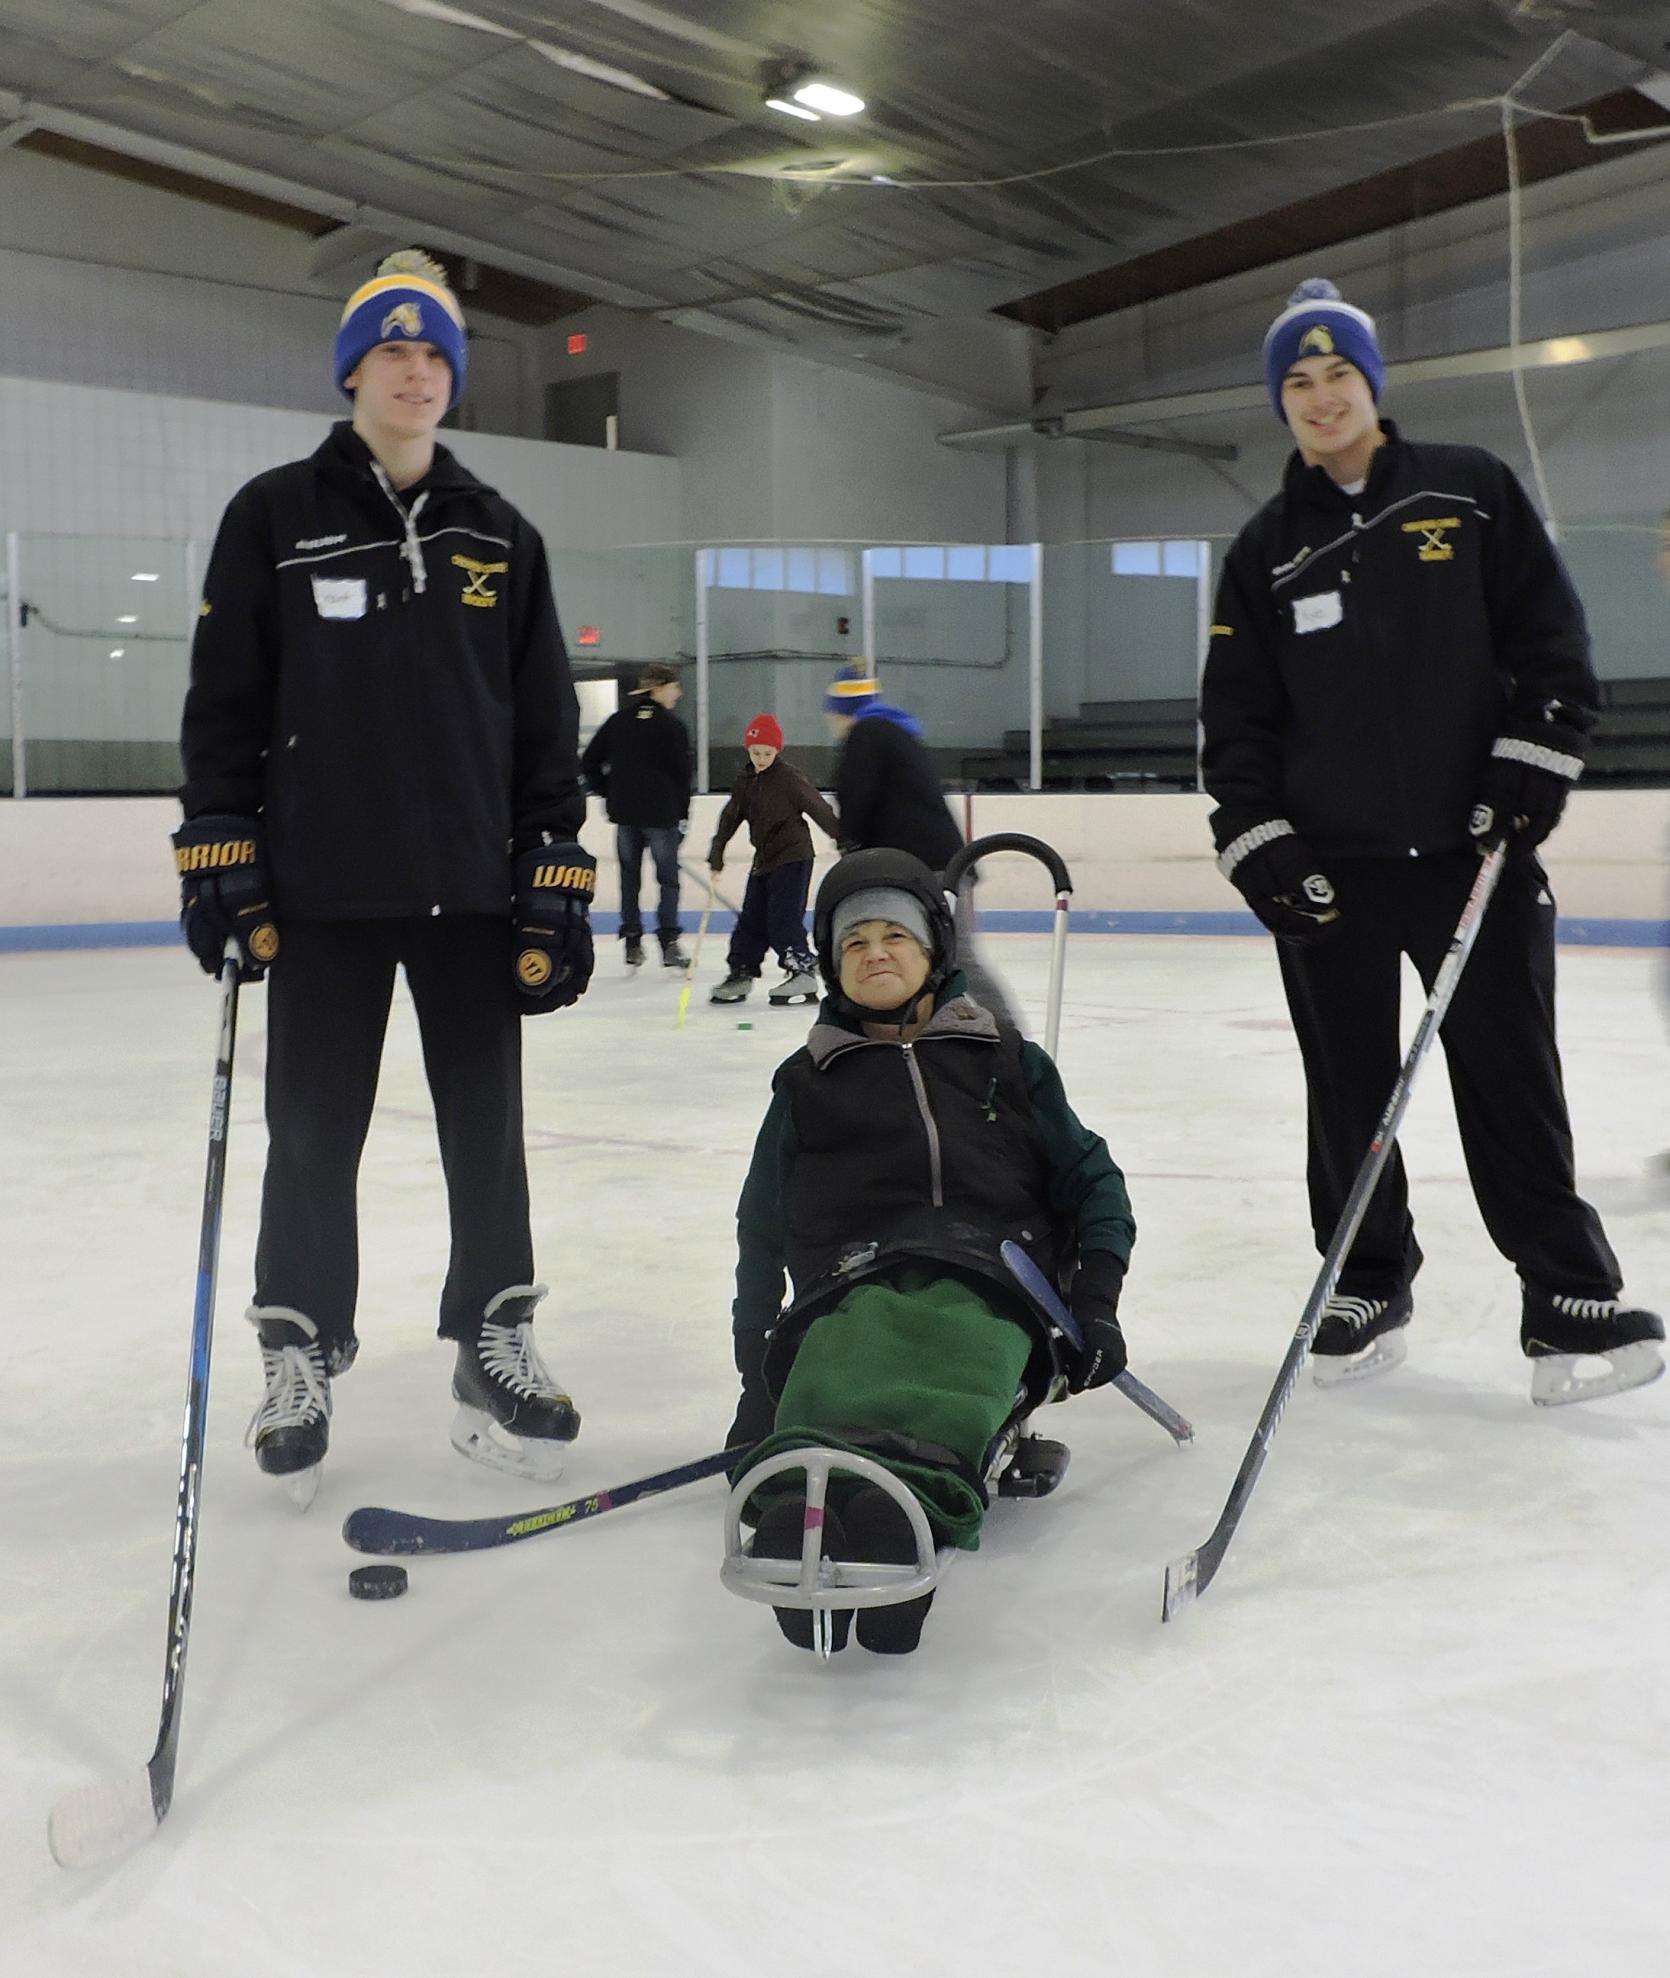 Two Chicopee Colts hockey players are standing on either side of a woman using an ice sled.